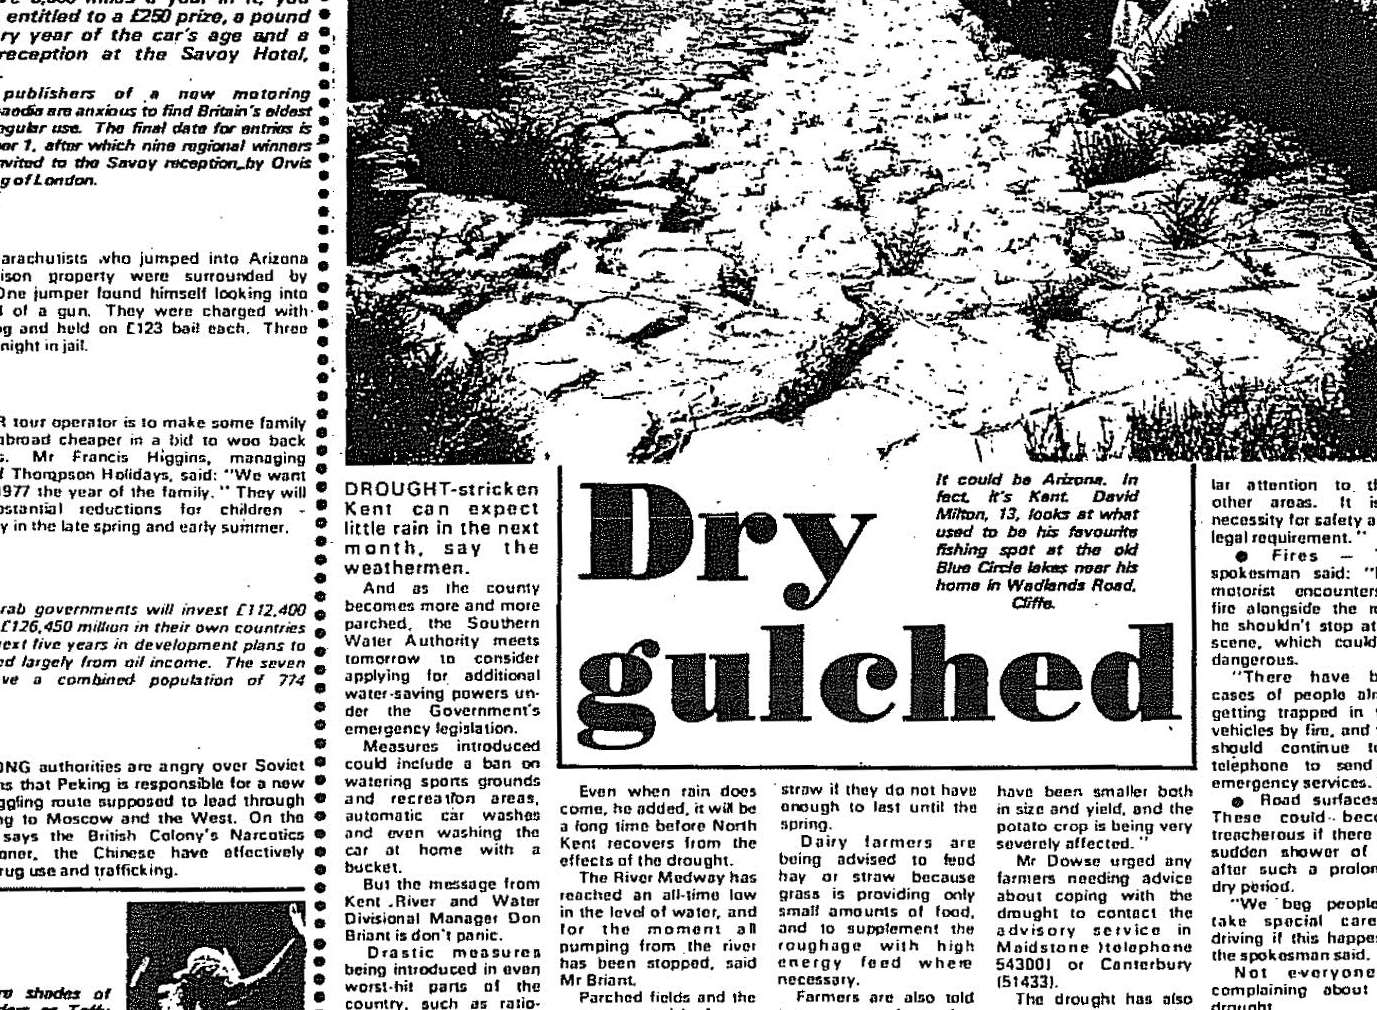 The drought affected everyone in 1976 - cutting from the Evening Post in August